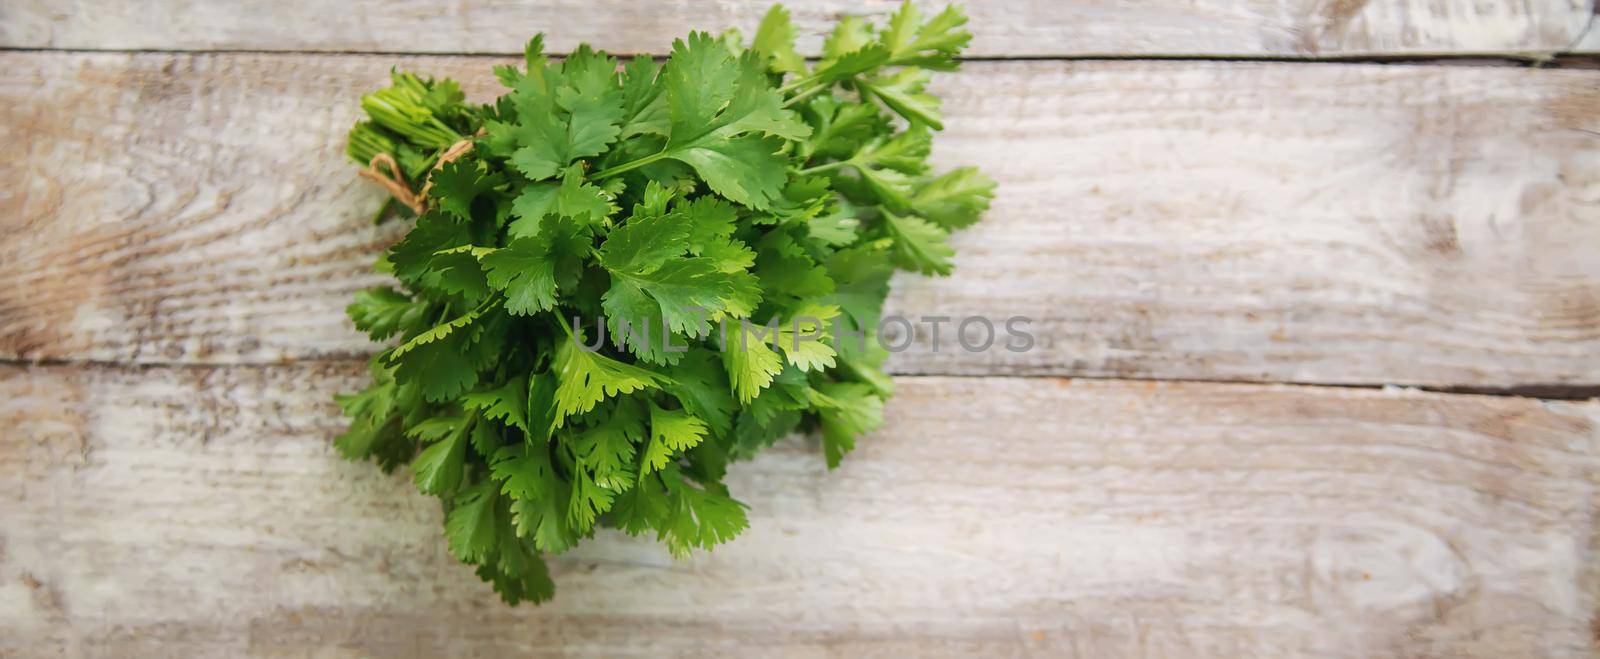 Fresh homemade herbs from the parsley garden. Selective focus. by mila1784